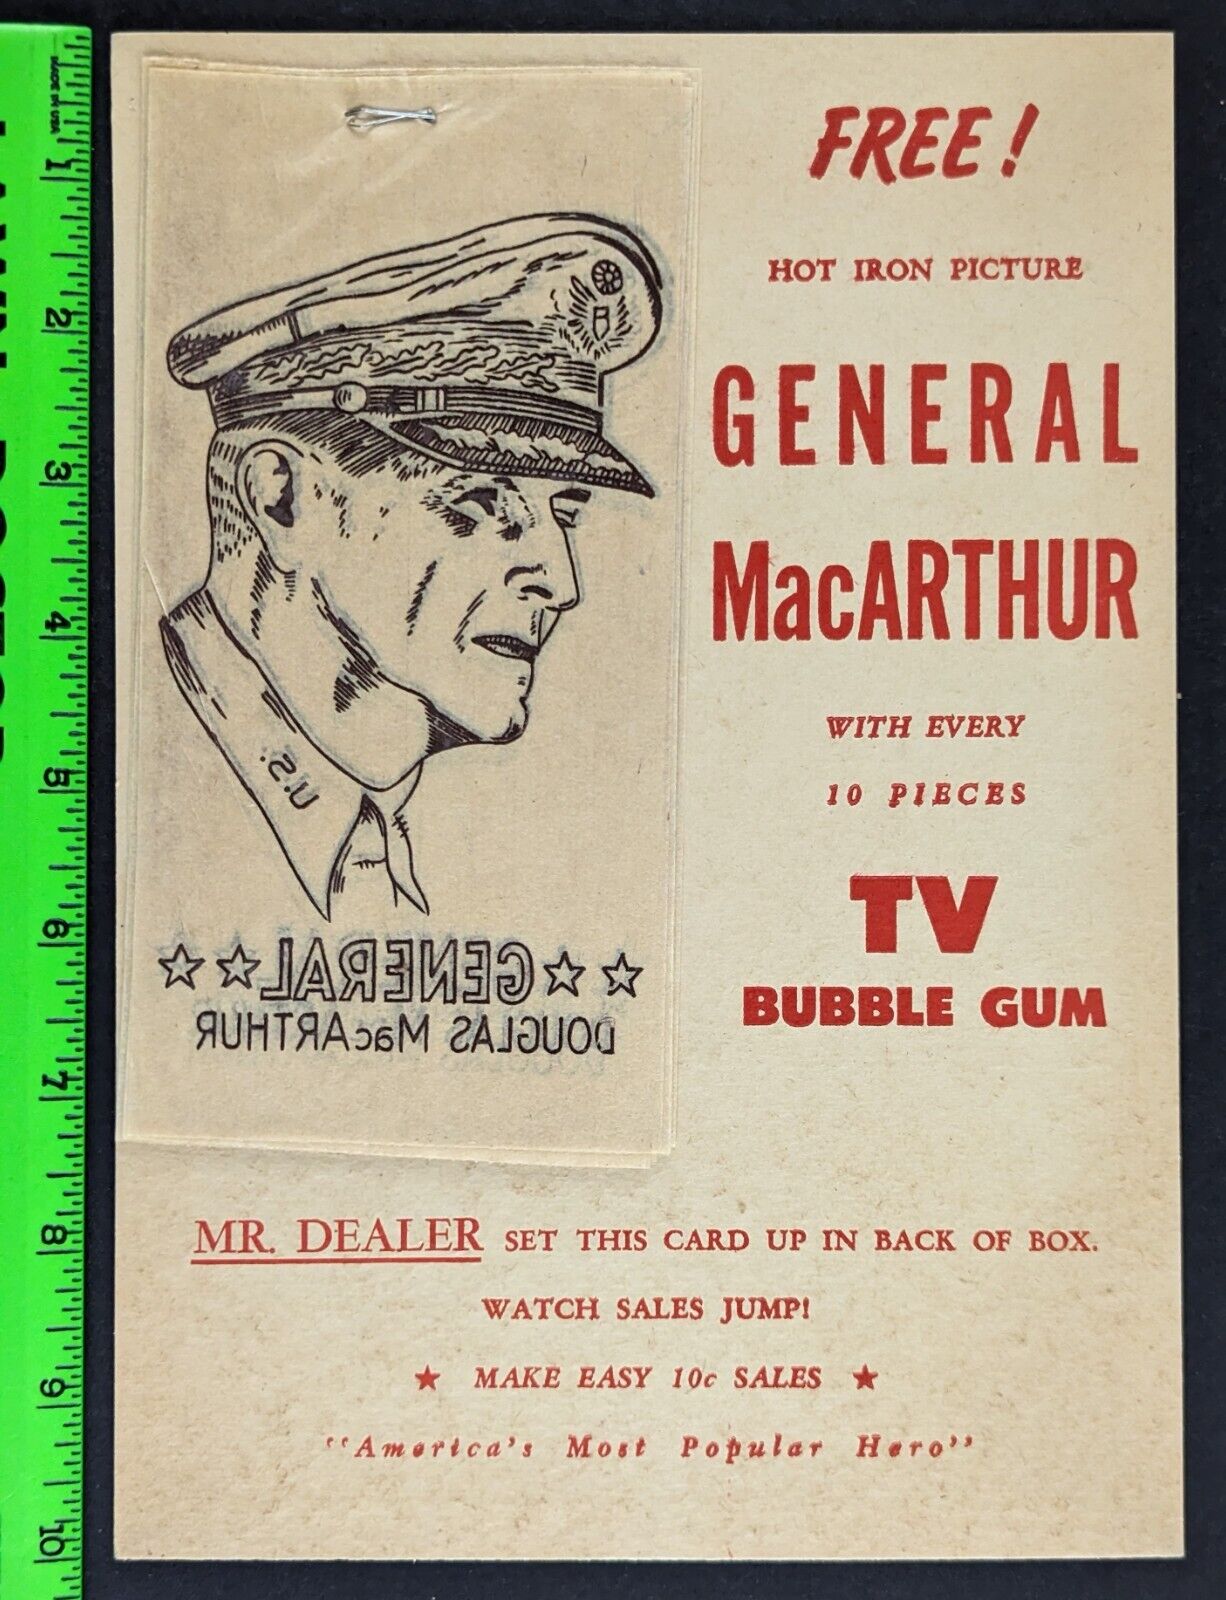 Vintage 1940\'s General McArthur TV Bubble Gum Decal Display (12 Decals)